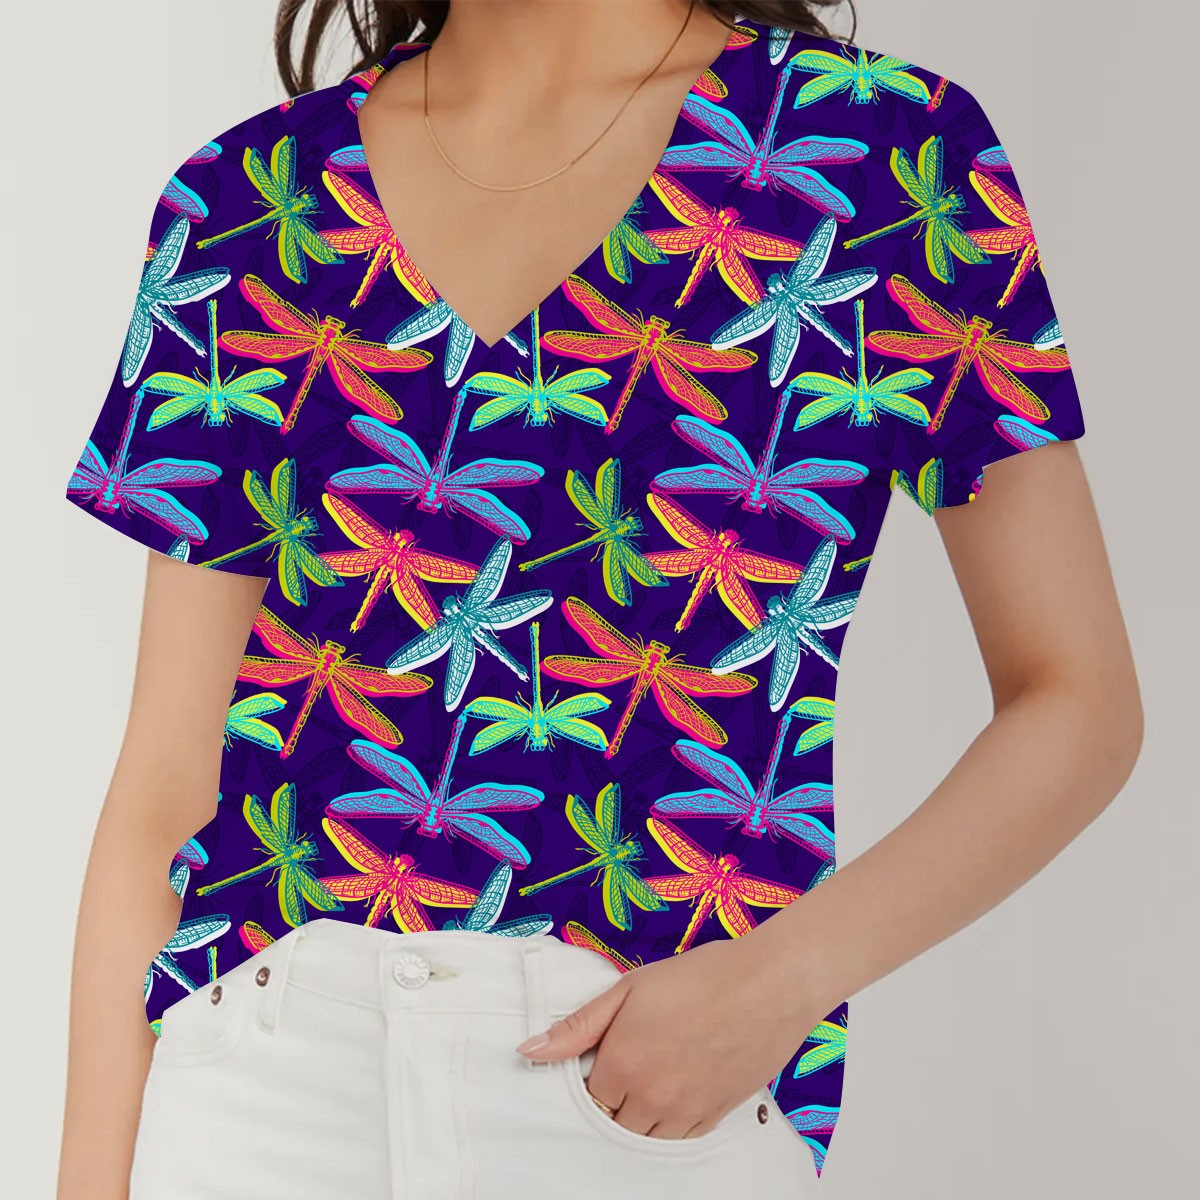 Neon Color Dragonfly V-Neck Women's T-Shirt